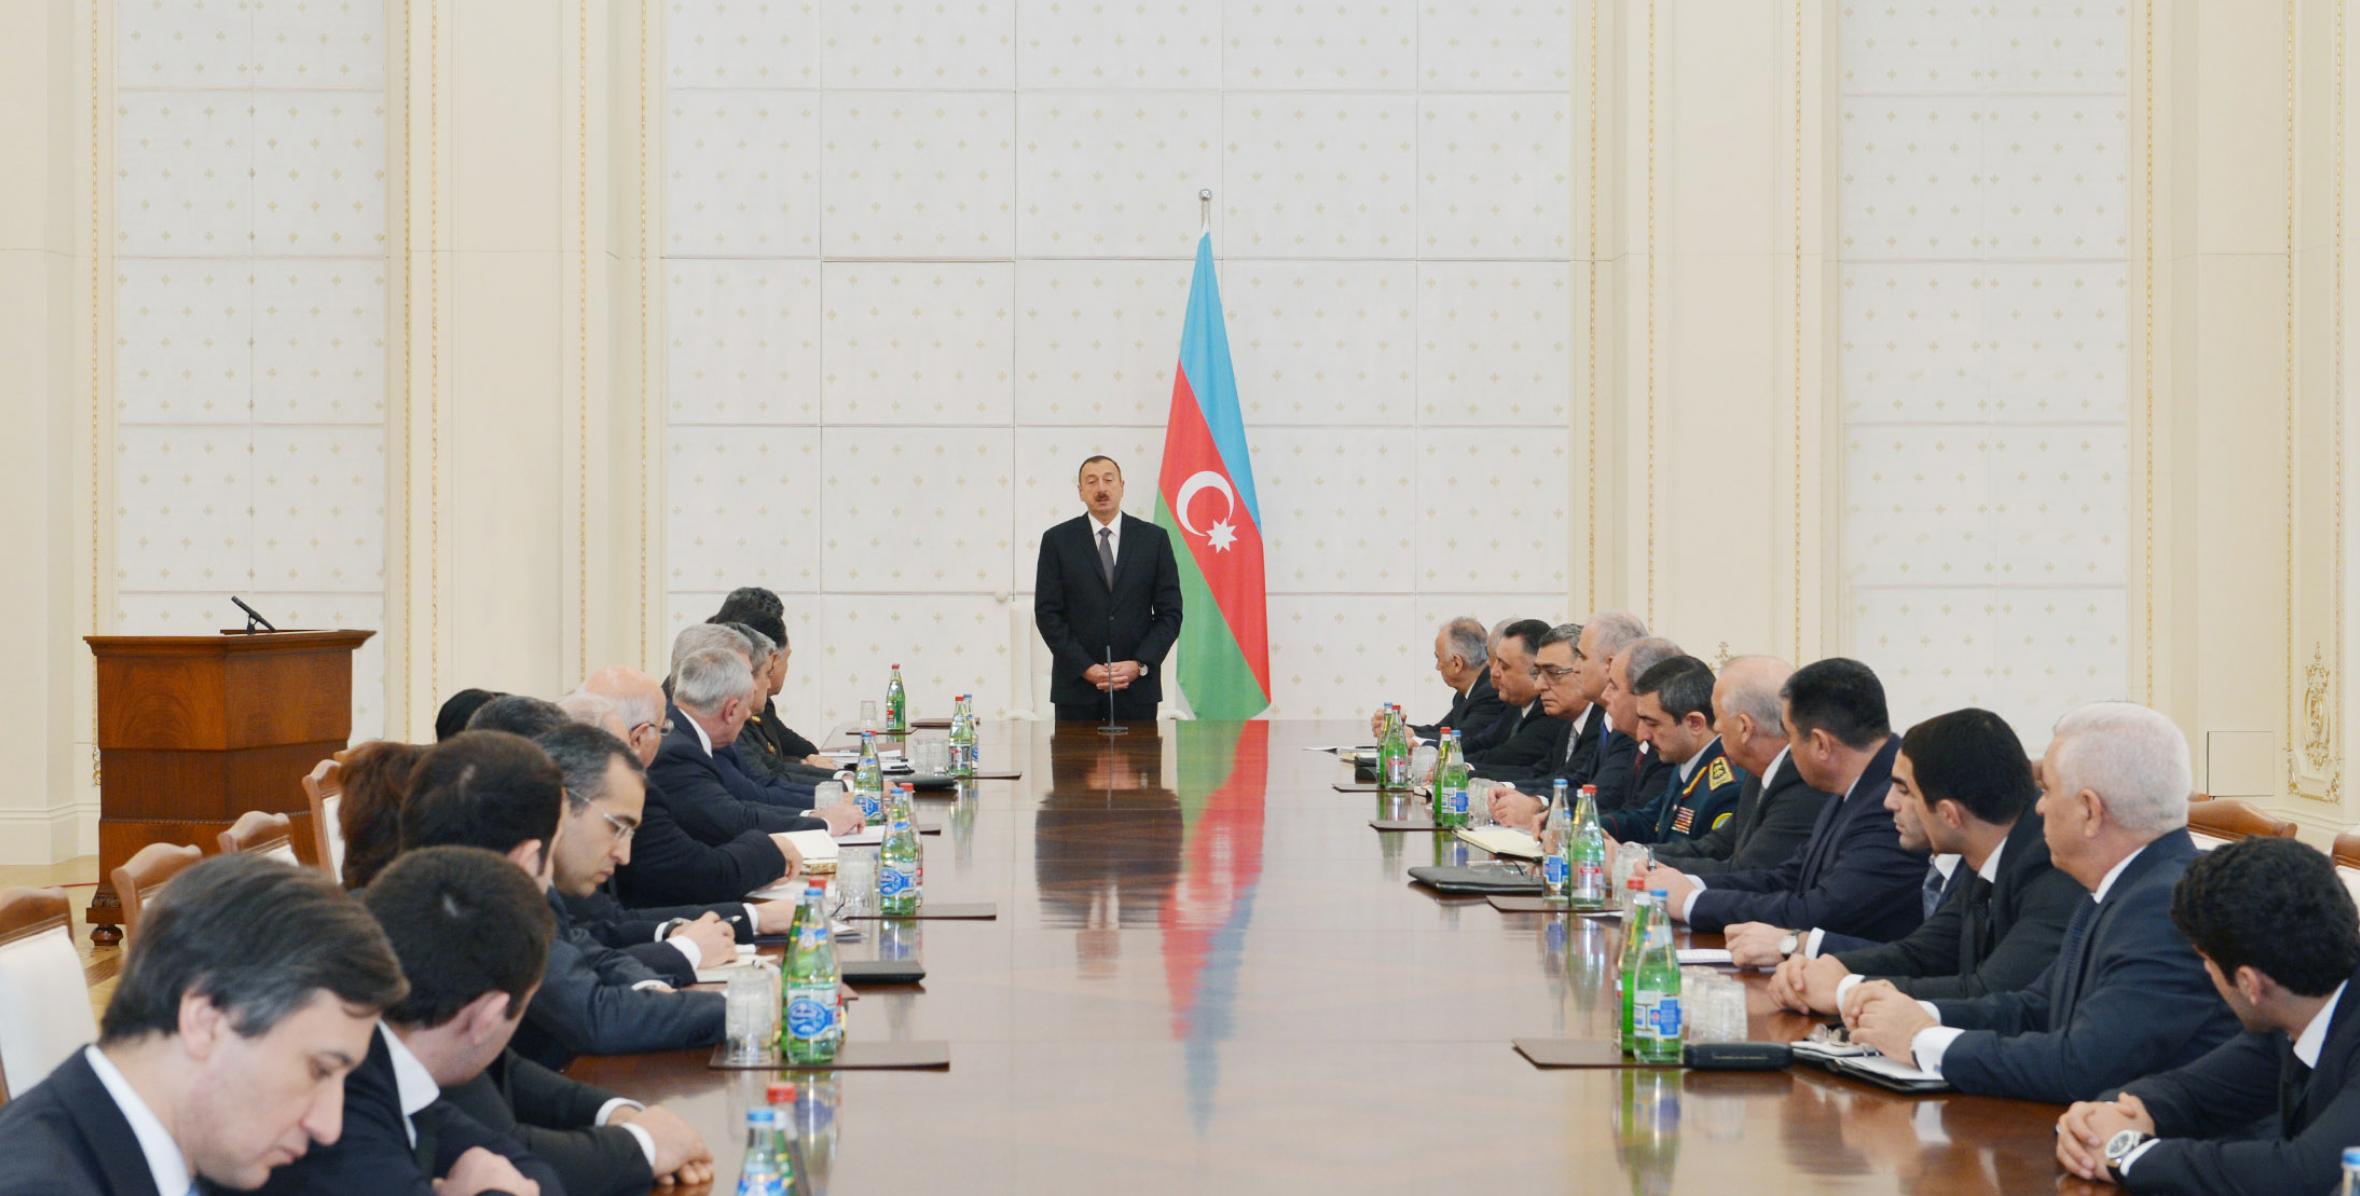 Closing speech by Ilham Aliyev at the first meeting of the Organizing Committee of the European Olympic Games due to be held in Baku in 2015